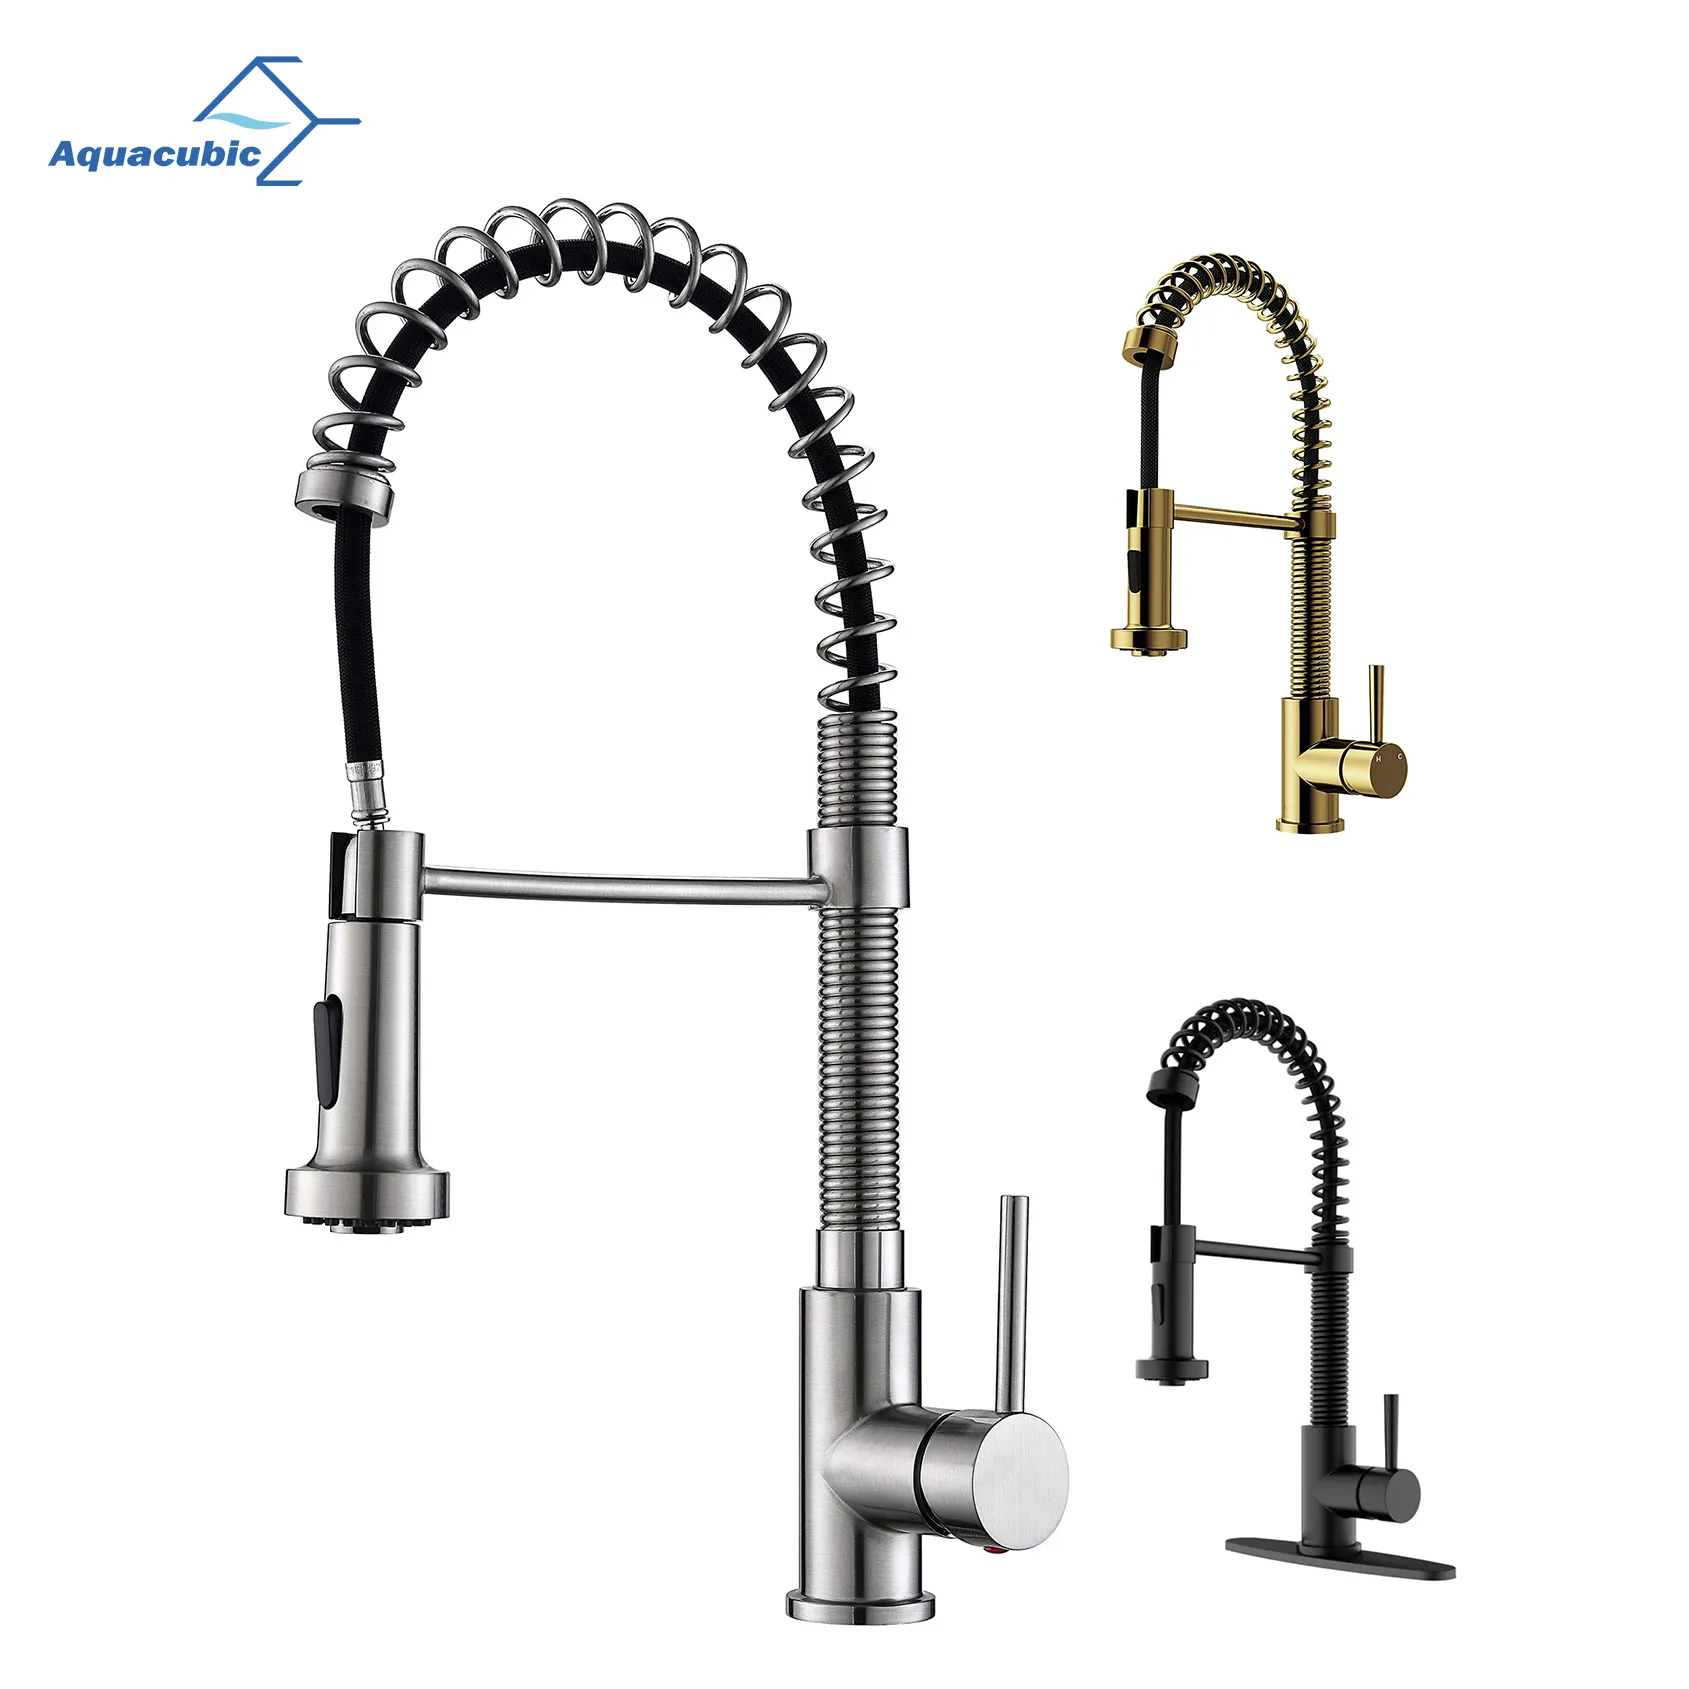 Aquacubic Flexible brushed nickel pulls out down kitchen faucet Sink faucet fast delivery faucet